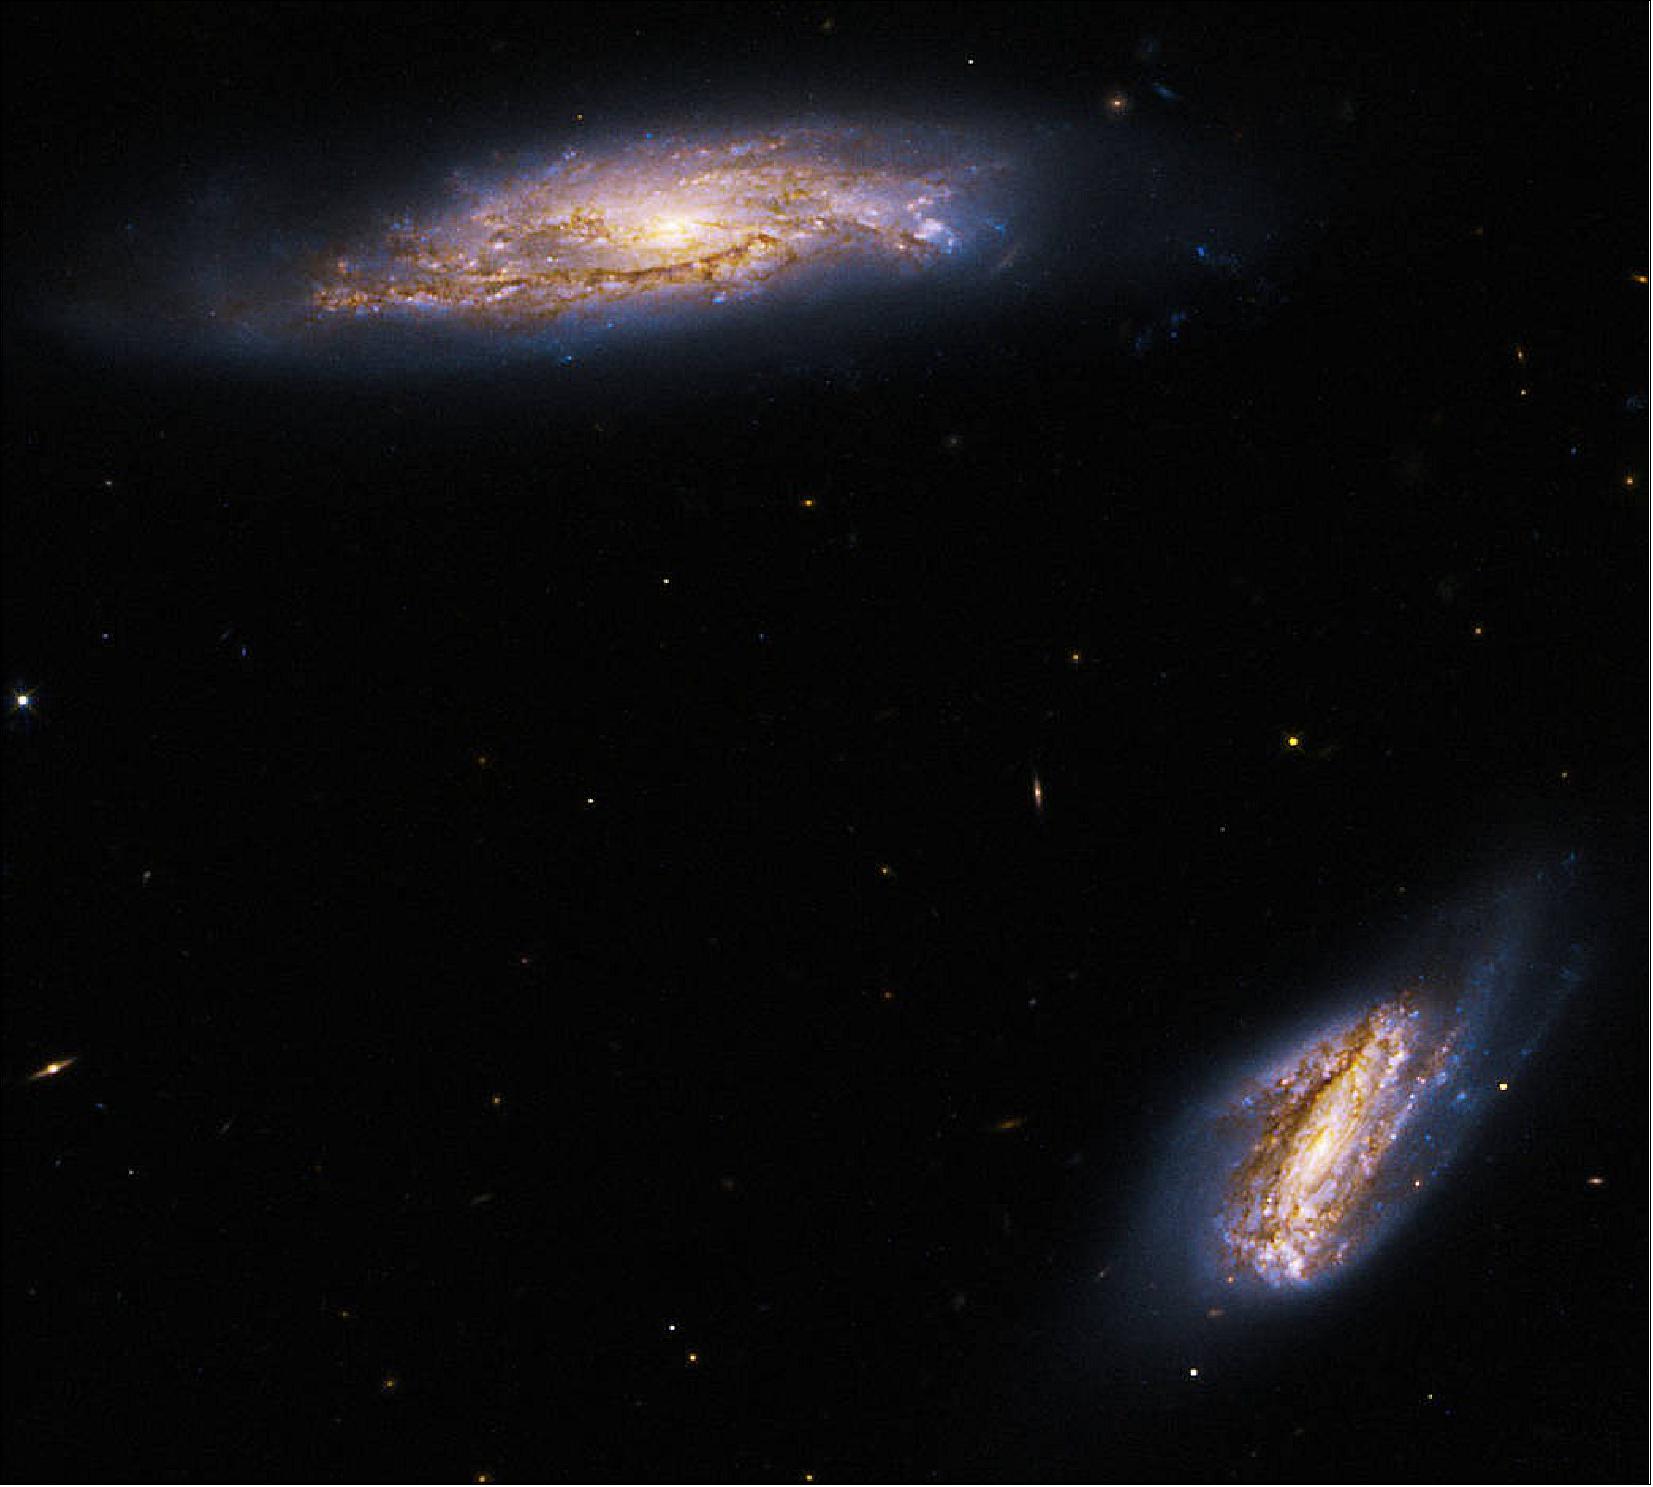 Figure 28: The image holds data from two separate Hubble observations of Arp 303. The first used Hubble’s Wide Field Camera 3 (WFC3) to study the pair’s clumpy star-forming regions in infrared light. Galaxies like IC 563 and IC 564 are very bright at infrared wavelengths and host many bright star-forming regions. The second used Hubble’s Advanced Camera for Surveys (ACS) to take quick looks at bright, interesting galaxies across the sky. The observations filled gaps in Hubble’s archive and looked for promising candidates that Hubble, the James Webb Space Telescope, and other telescopes could study further. The colors red, orange, and green represent infrared wavelengths taken with WFC3, and the color blue represents ACS visible light data [image credit: NASA, ESA, K. Larson (STScI), and J. Dalcanton (University of Washington); Image Processing: G. Kober (NASA Goddard/Catholic University of America)]